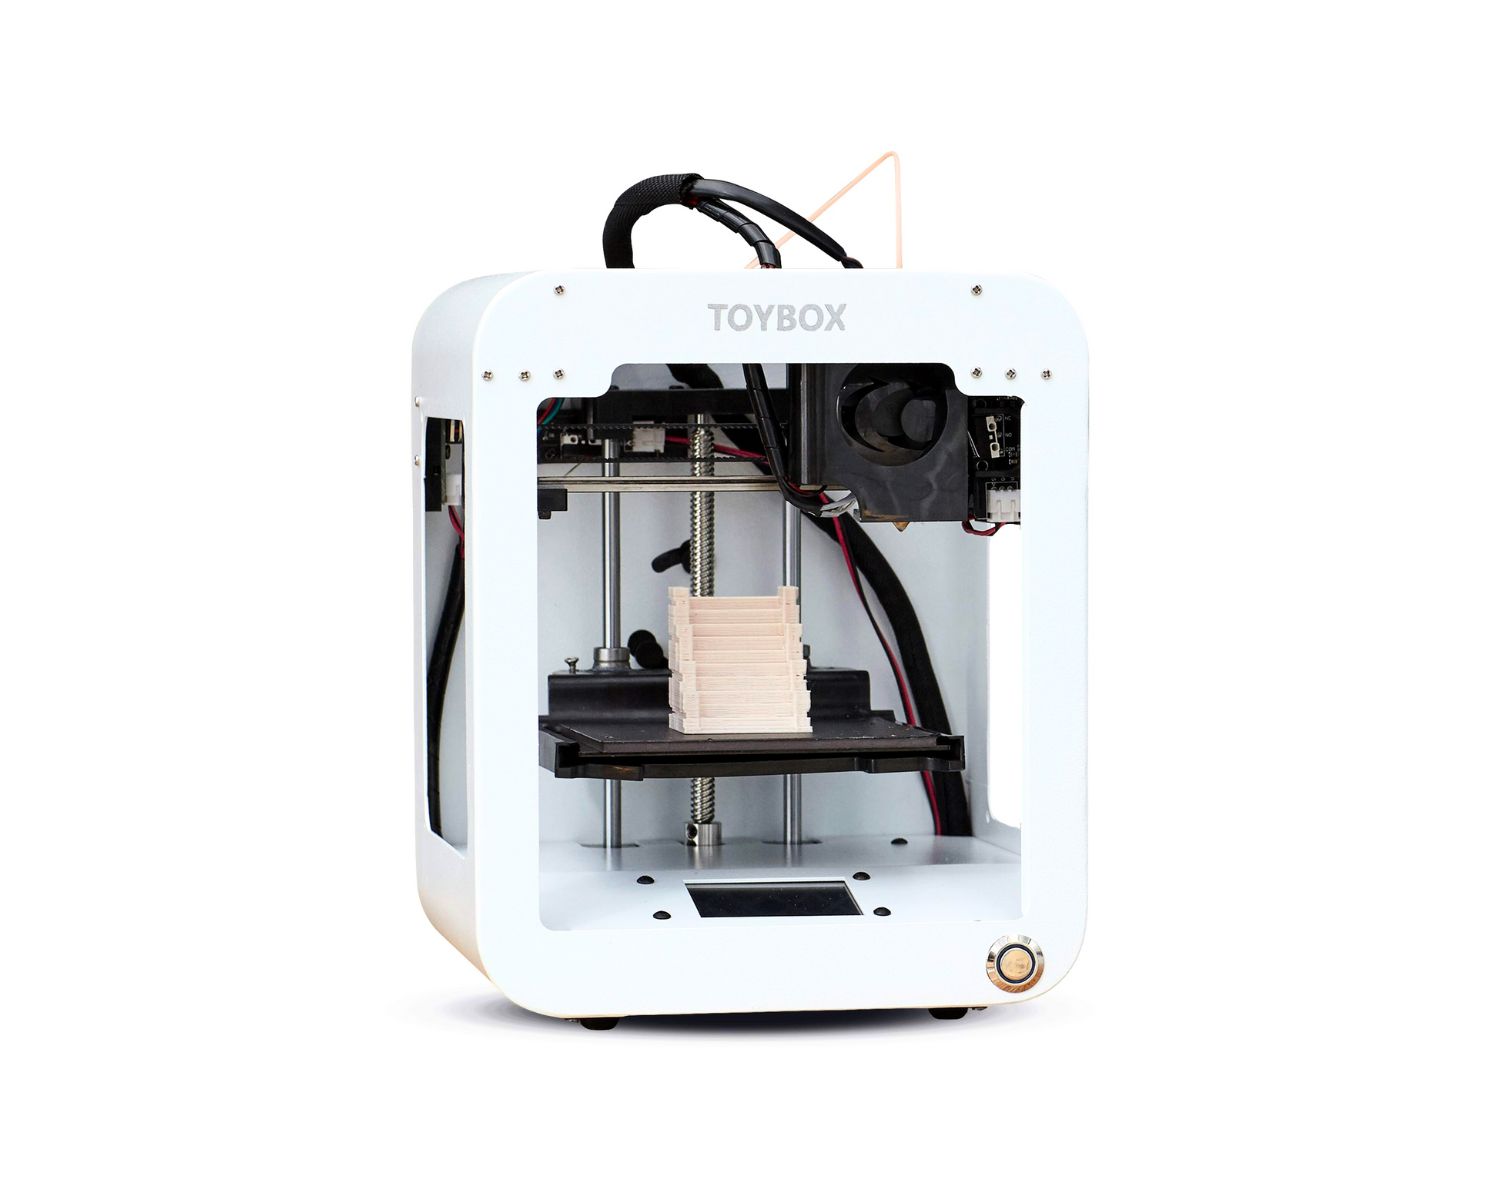 How To Calibrate Toybox 3D Printer